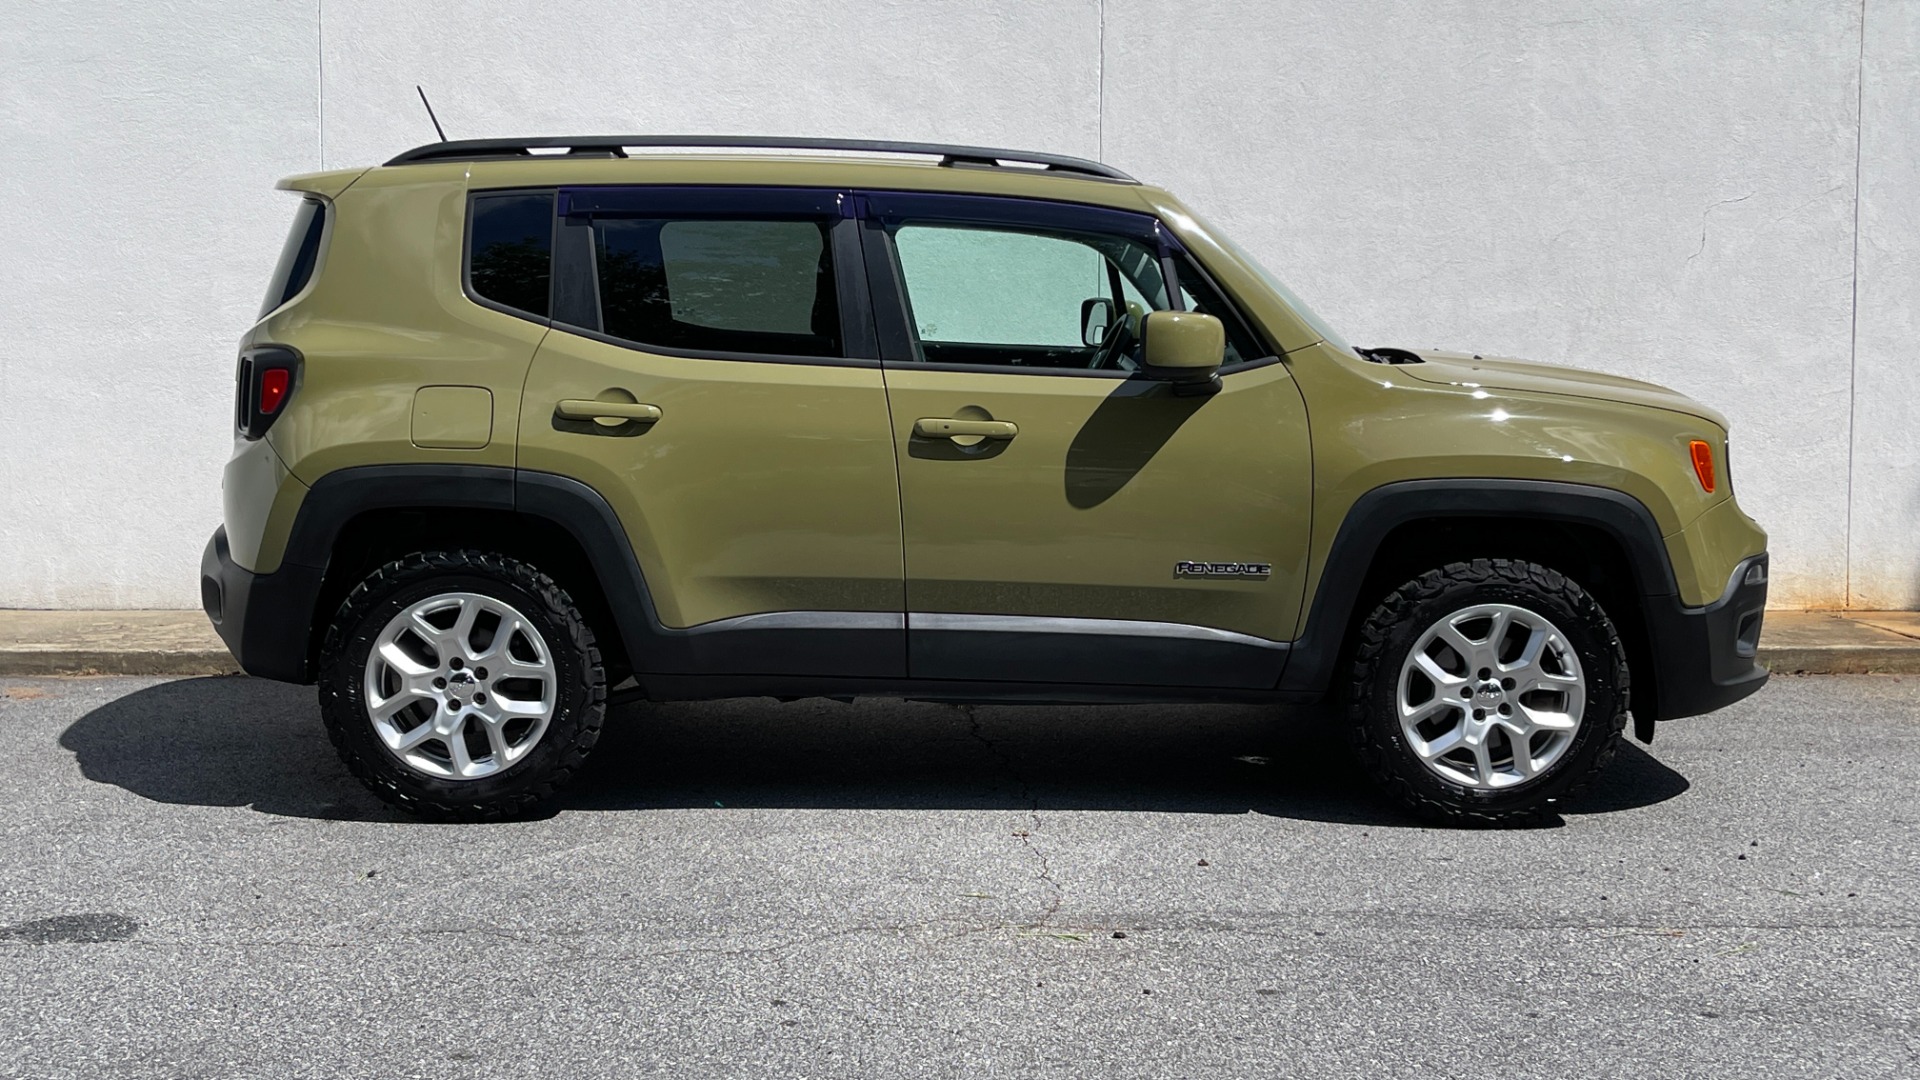 Used 2015 Jeep Renegade LATITUDE / 2.4L ENGINE / KEYLESS ENTRY / REMOTE START for sale $17,495 at Formula Imports in Charlotte NC 28227 4